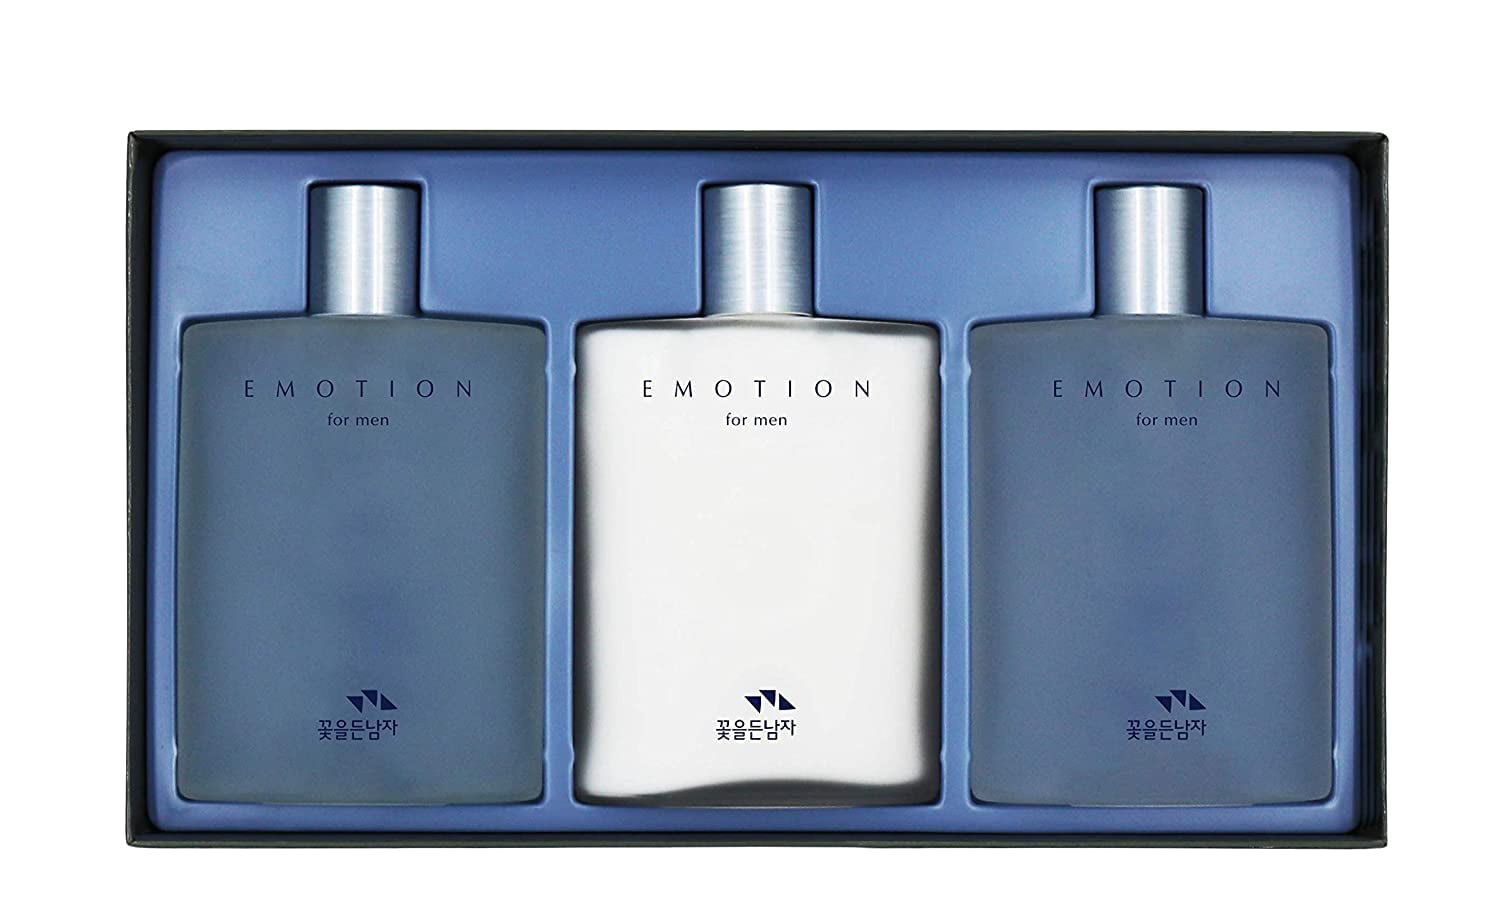 EMOTION FOR MEN AFTER SHAVE & FACE LOTION SKIN CARE SET Containing